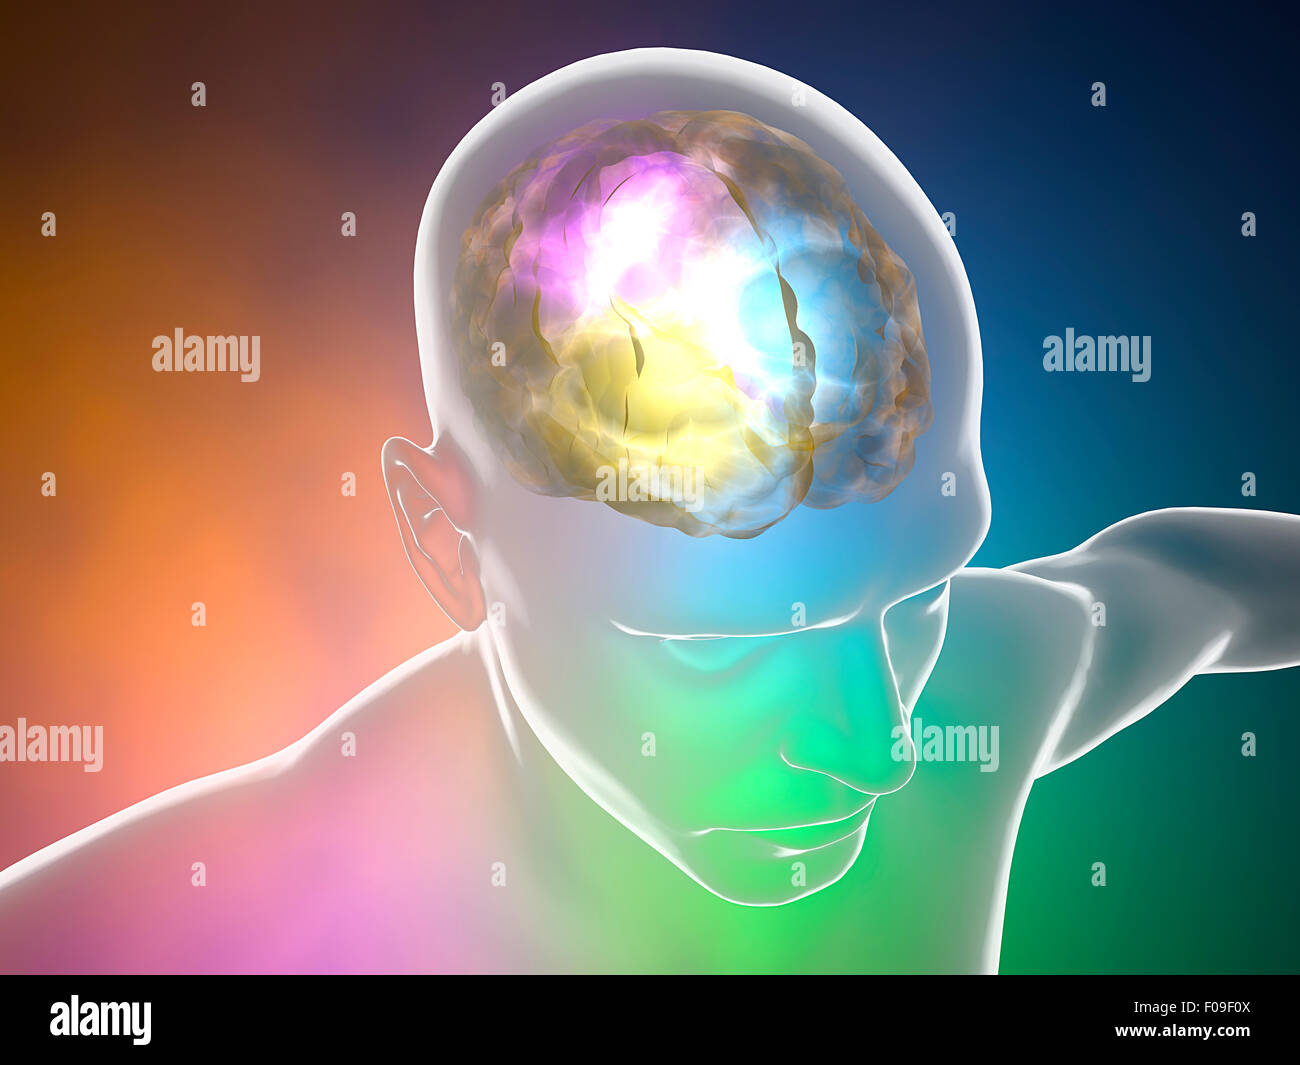 Human anatomy of brain neurons on colorful background Stock Photo